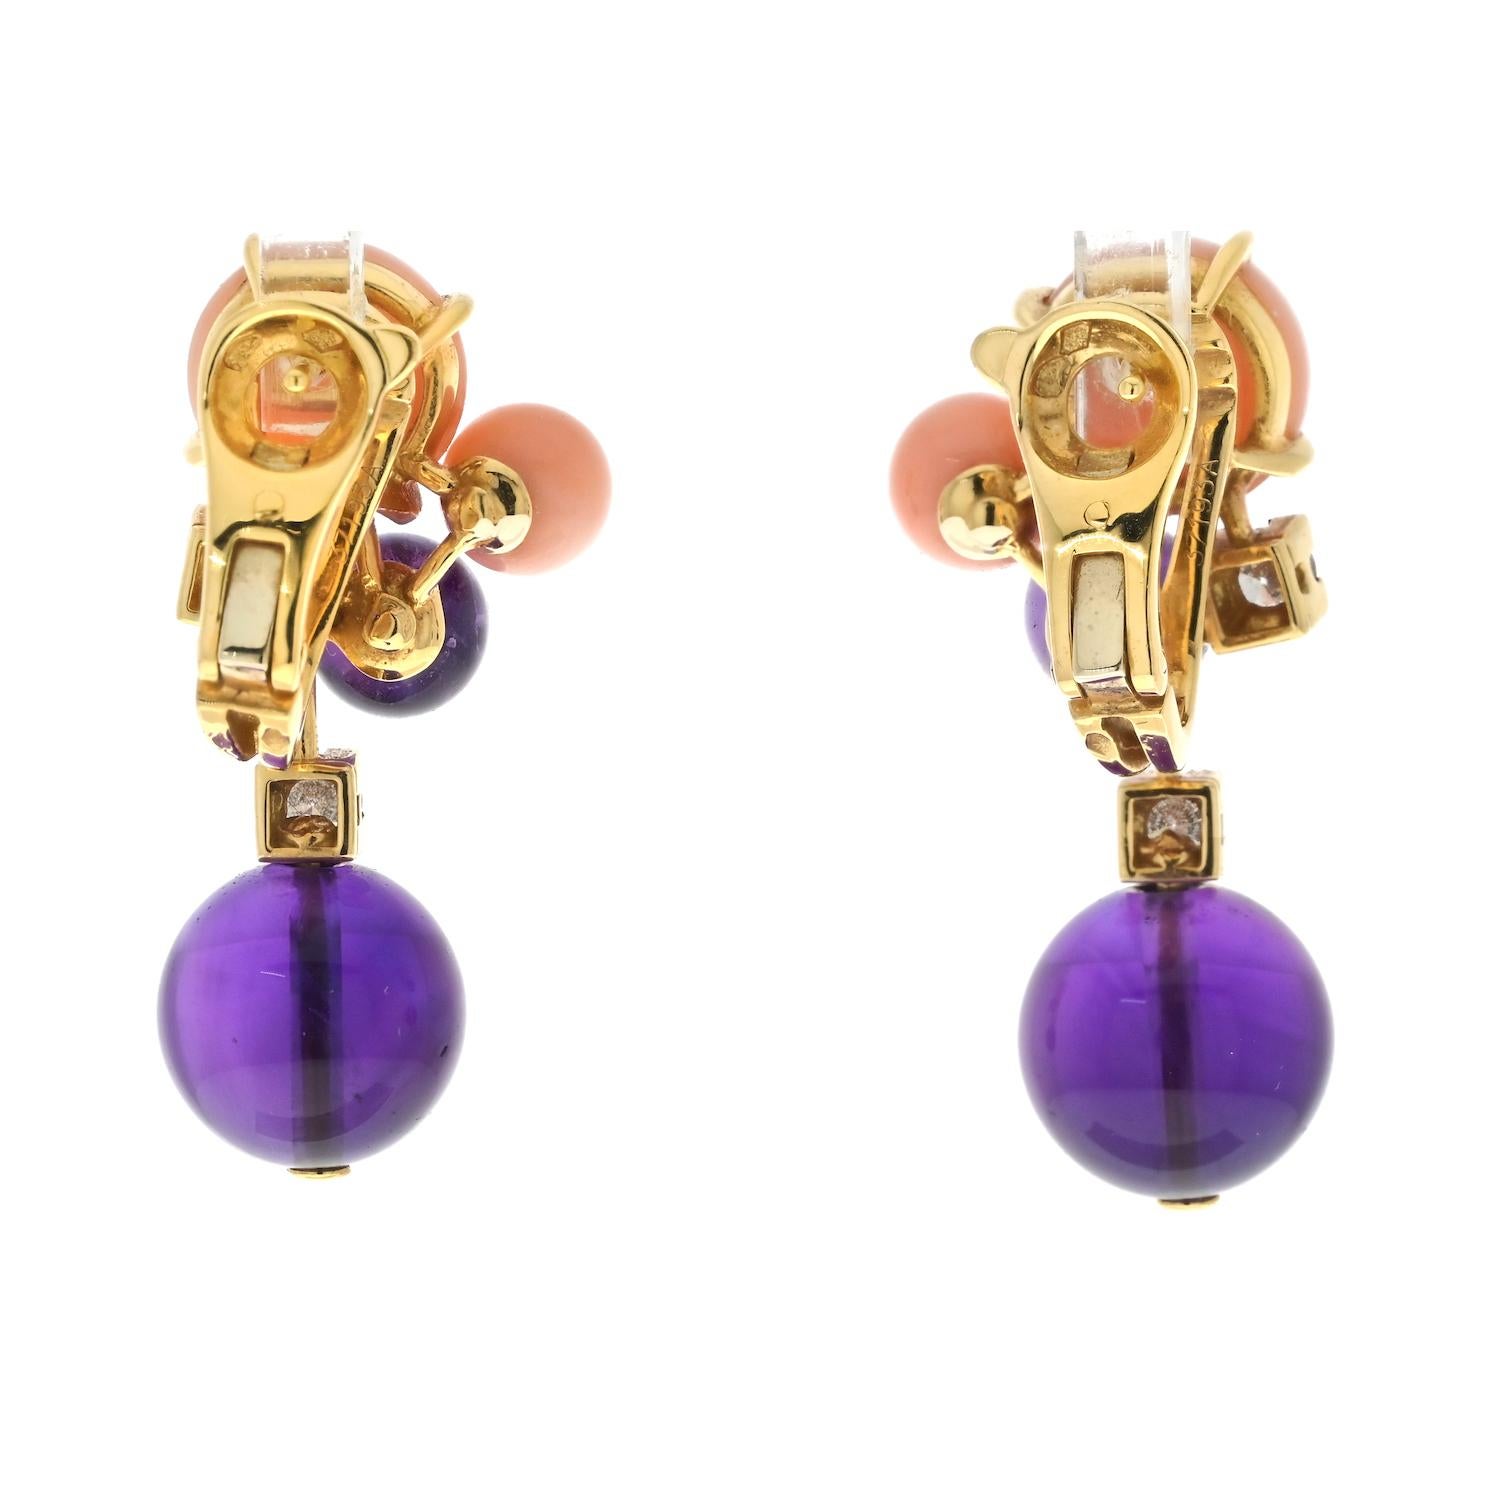 Round Cut Cartier Delices De Goa 18K Yellow Gold Diamond, Coral And Amethyst Earrings For Sale